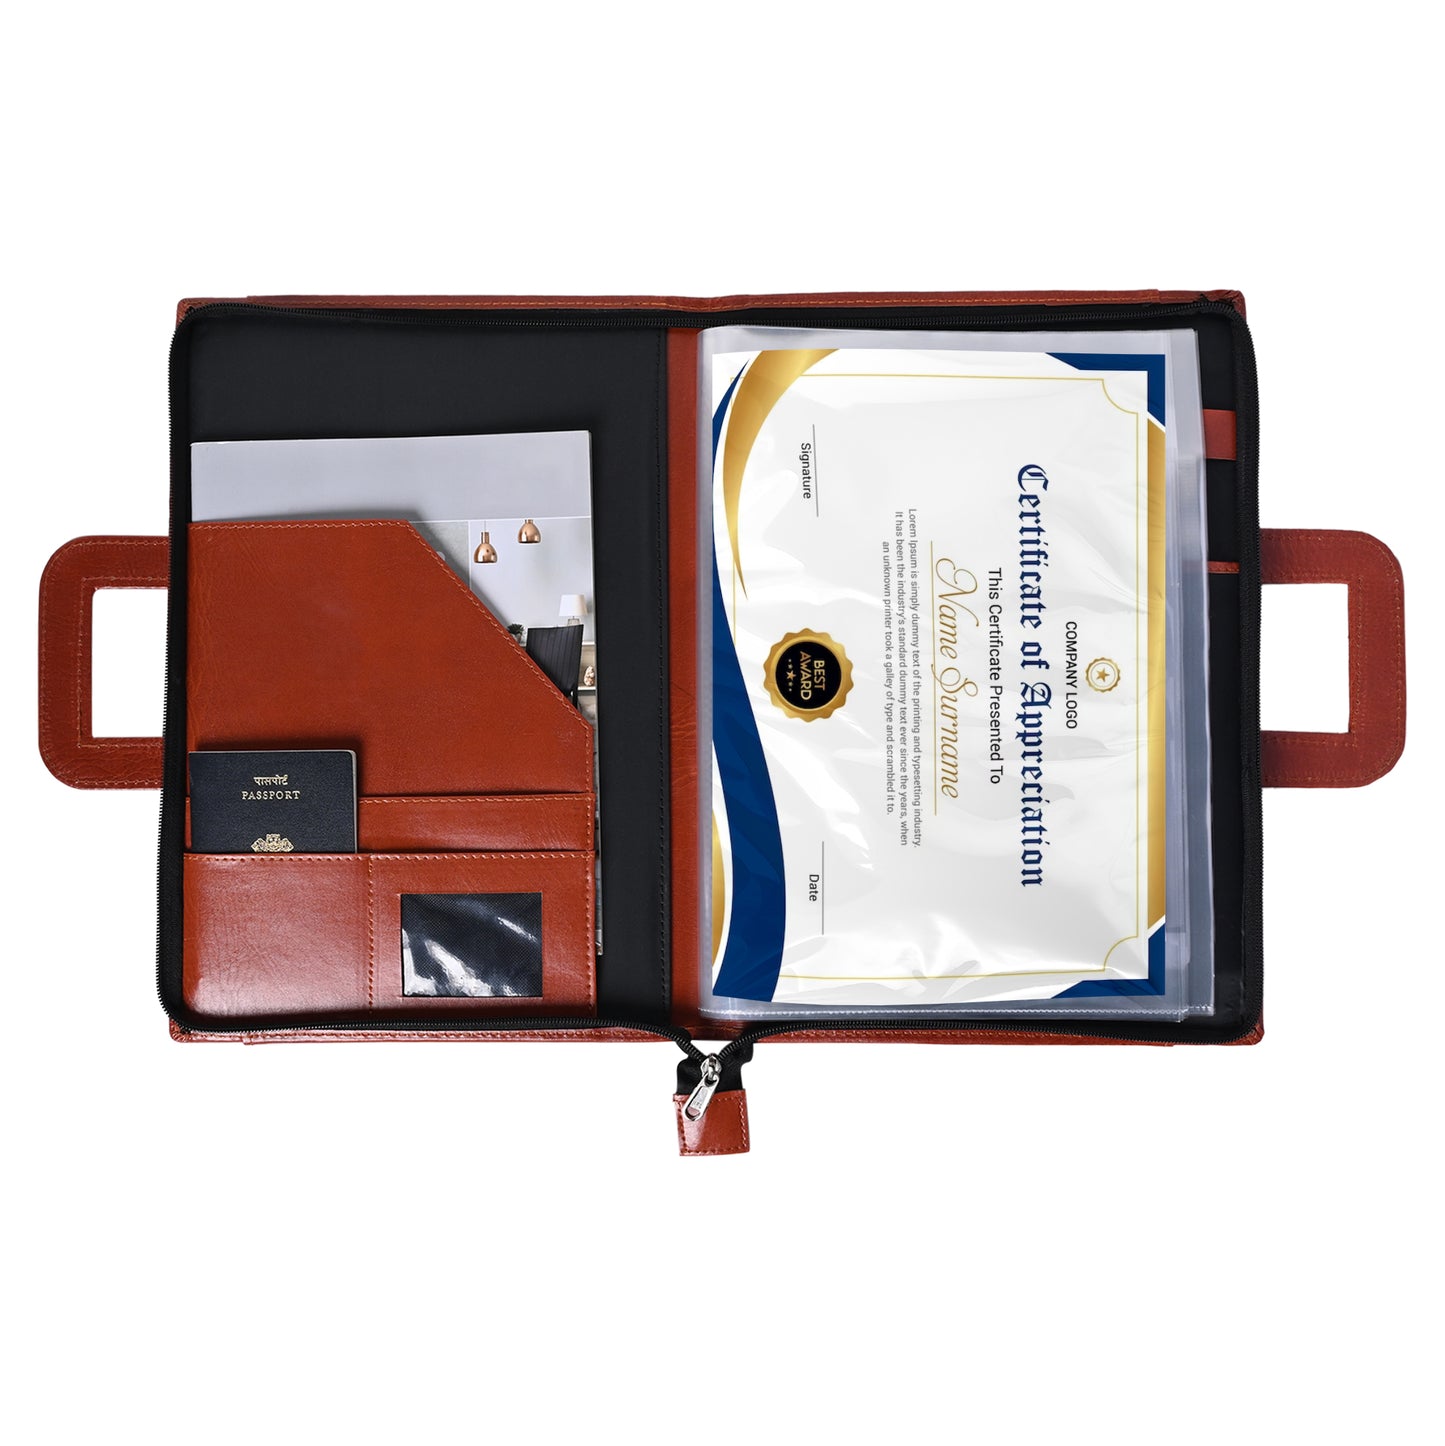 Premium Document File Folder with Handle - B4 Size (Bigger Than A4 and Legal) for 40 Professional Documents